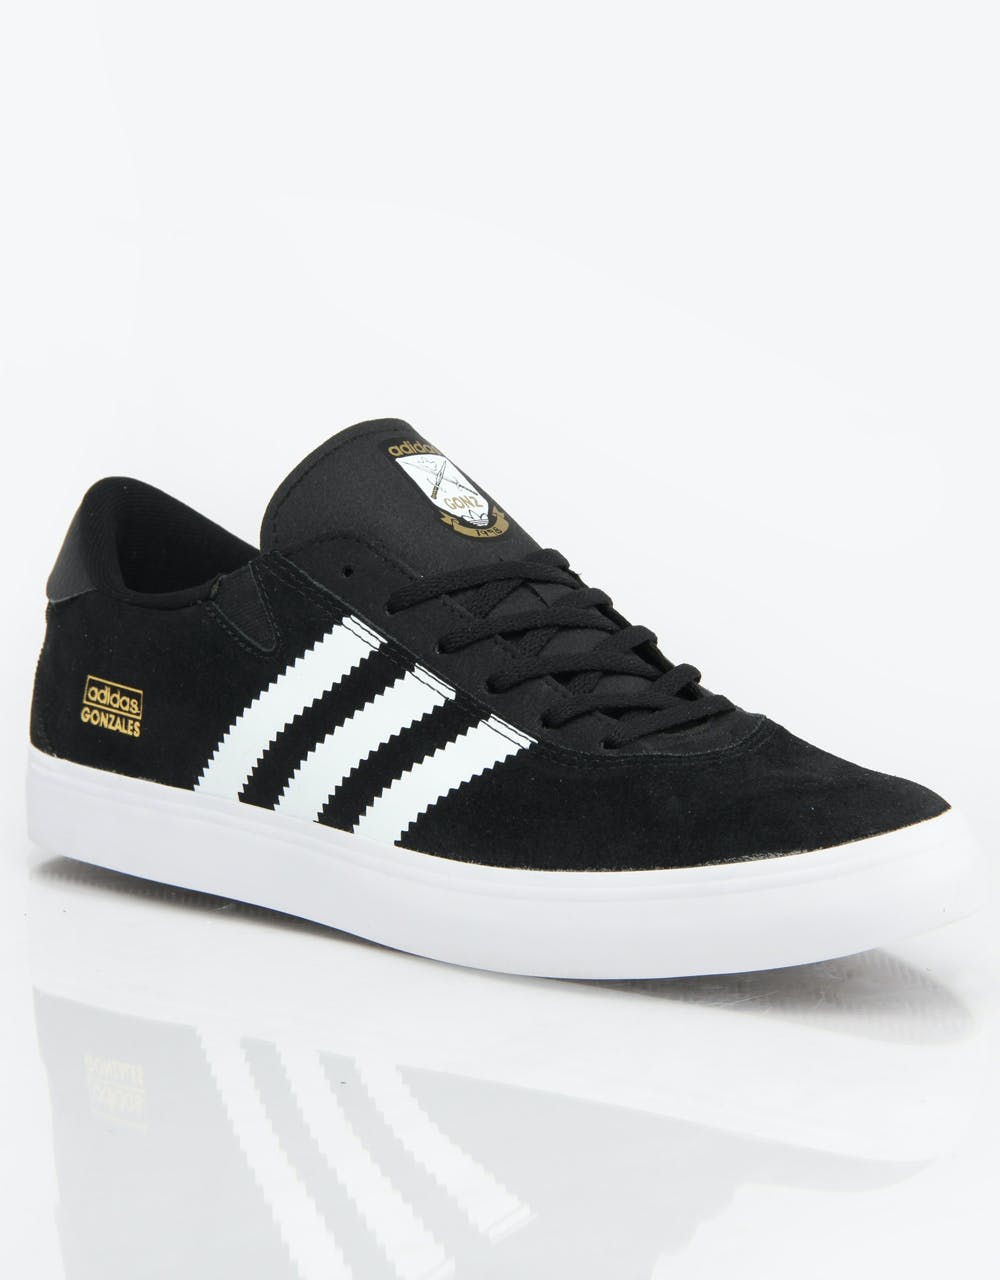 adidas skate shoes gonzales